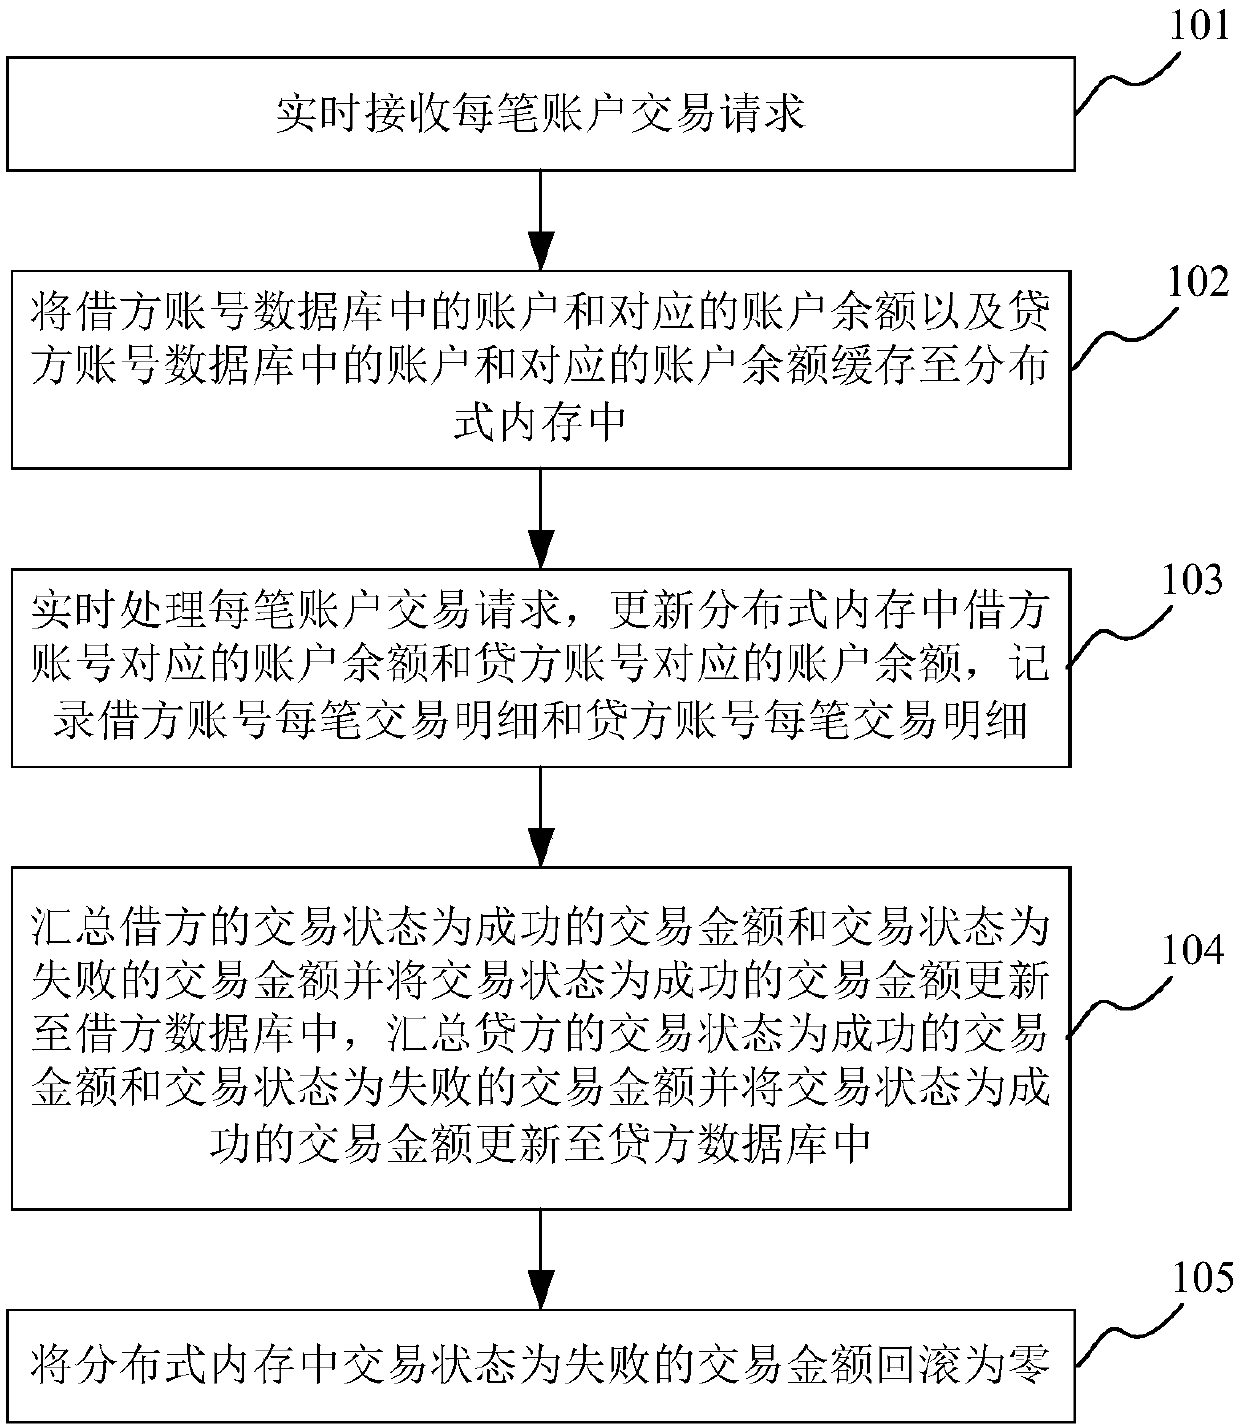 Hotspot account transaction system and method